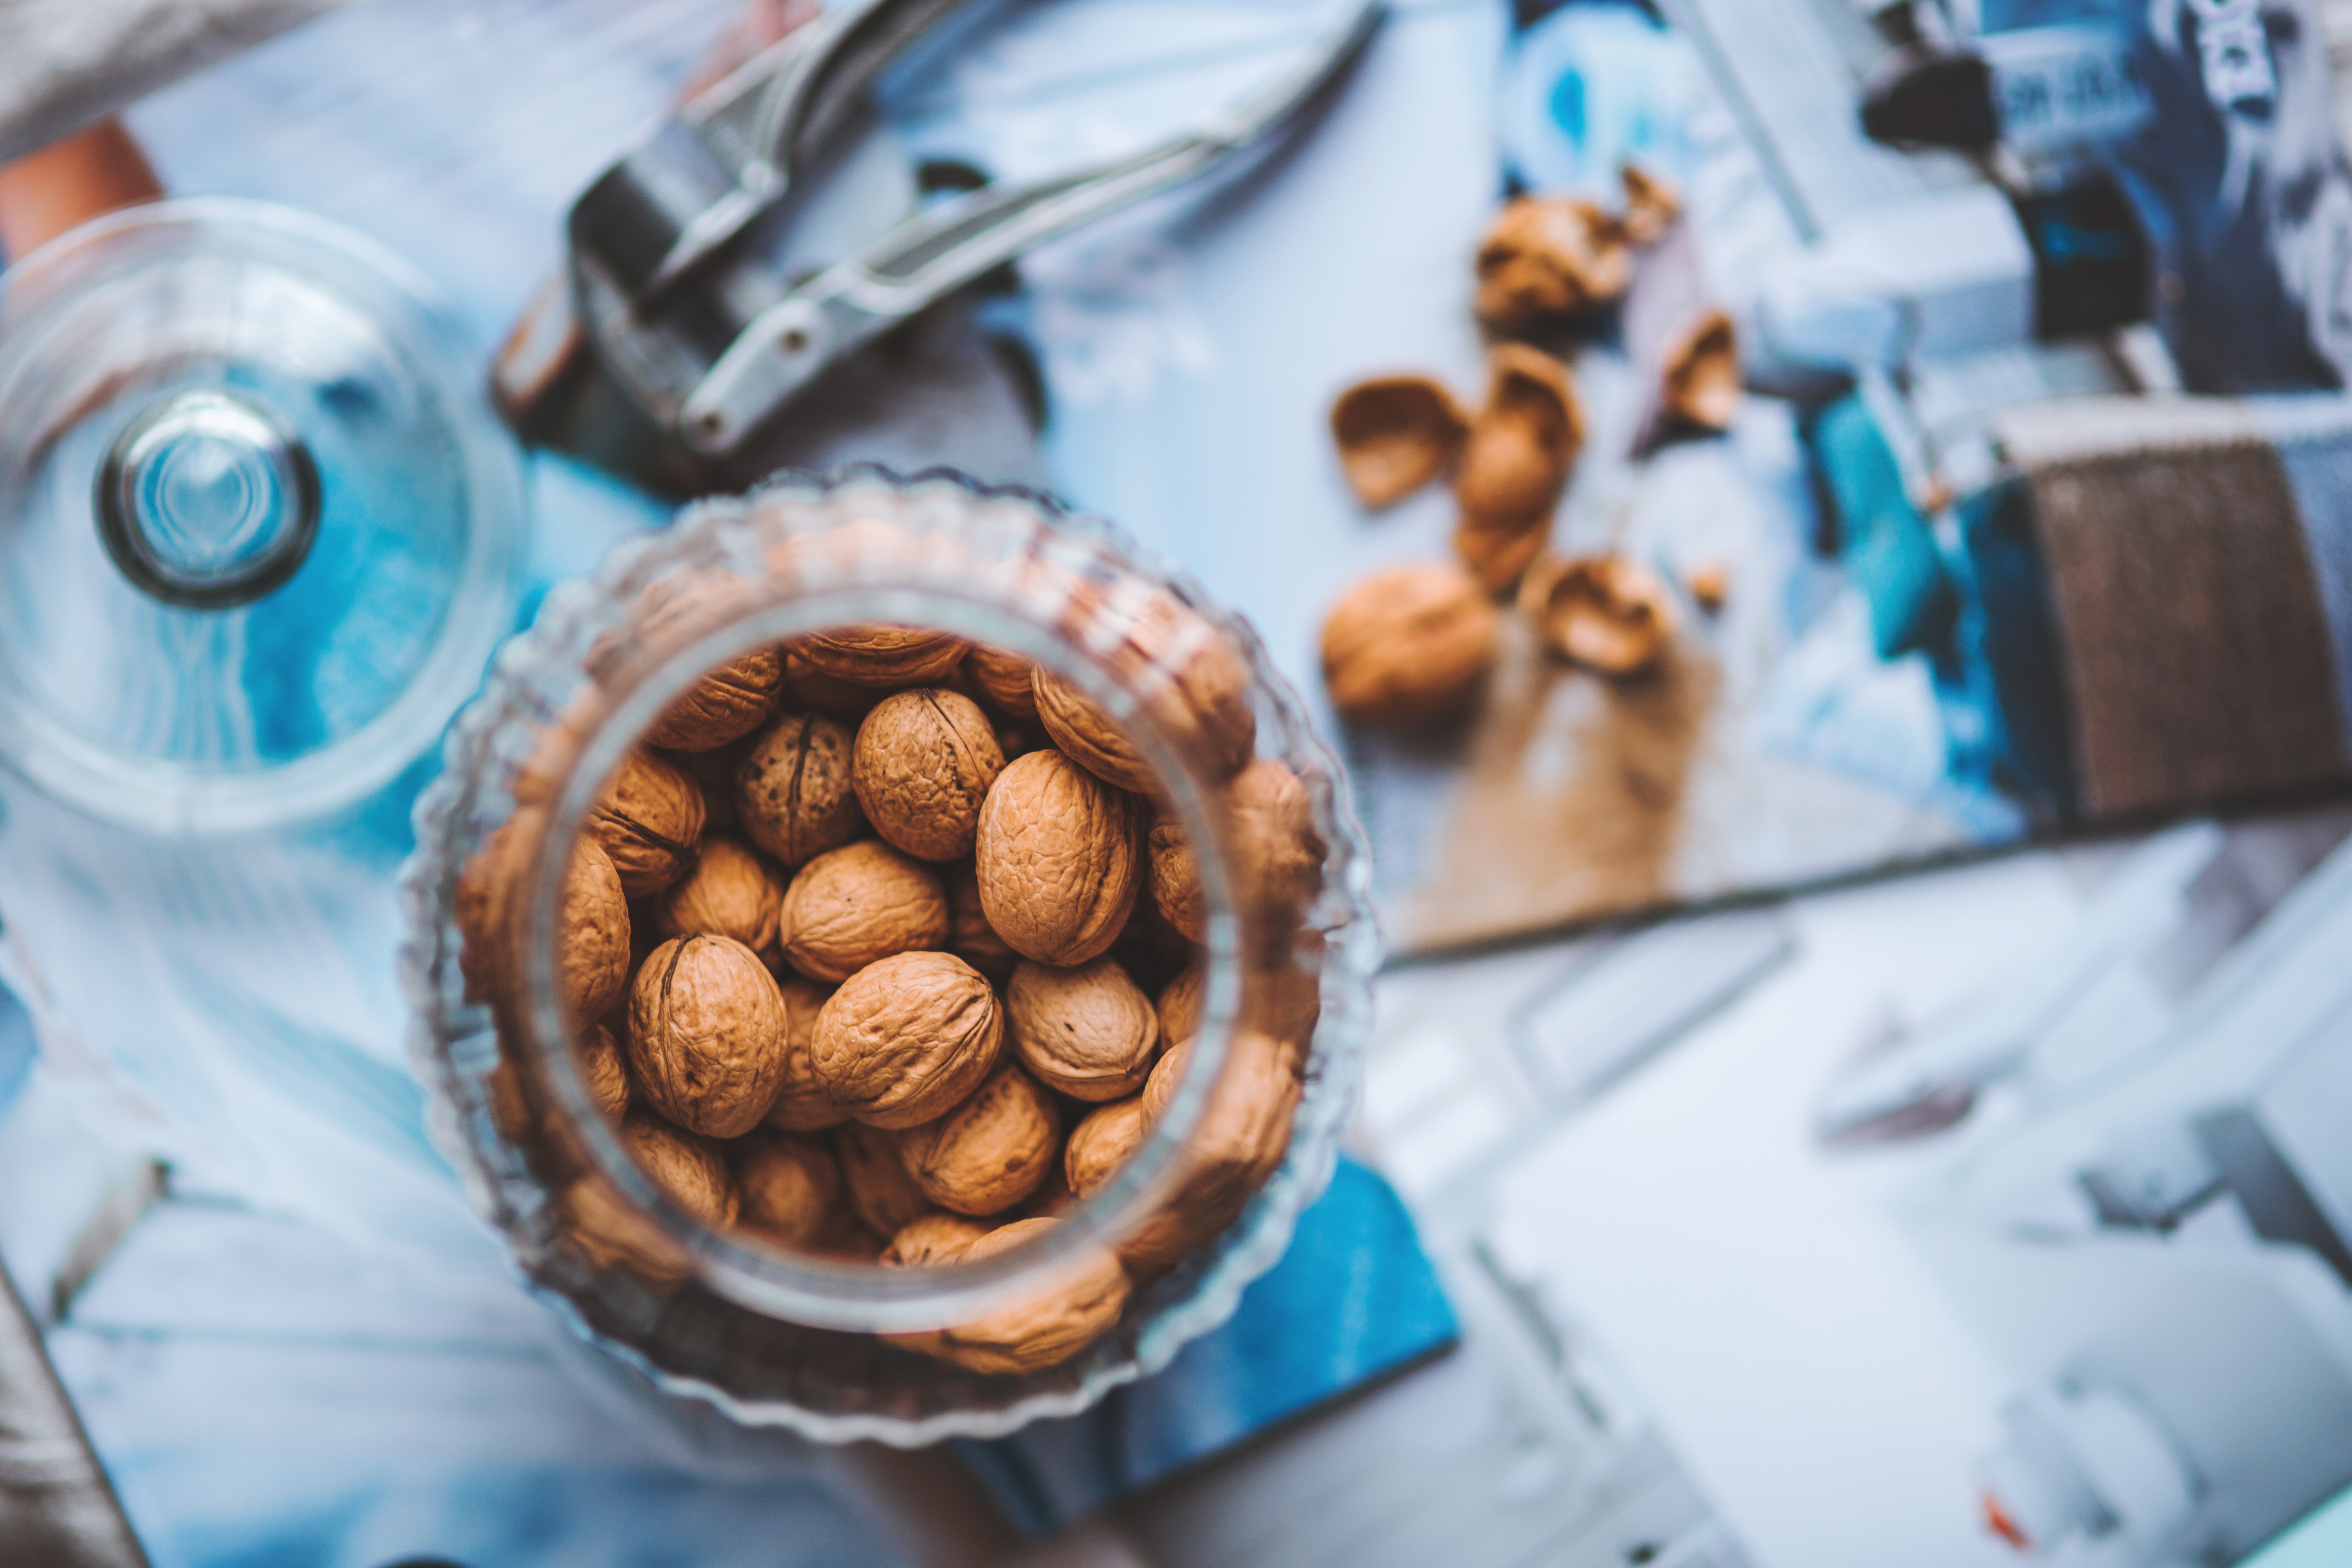 Nuts are also a good food option for healthy breakfast. Here is a jar of walnuts.